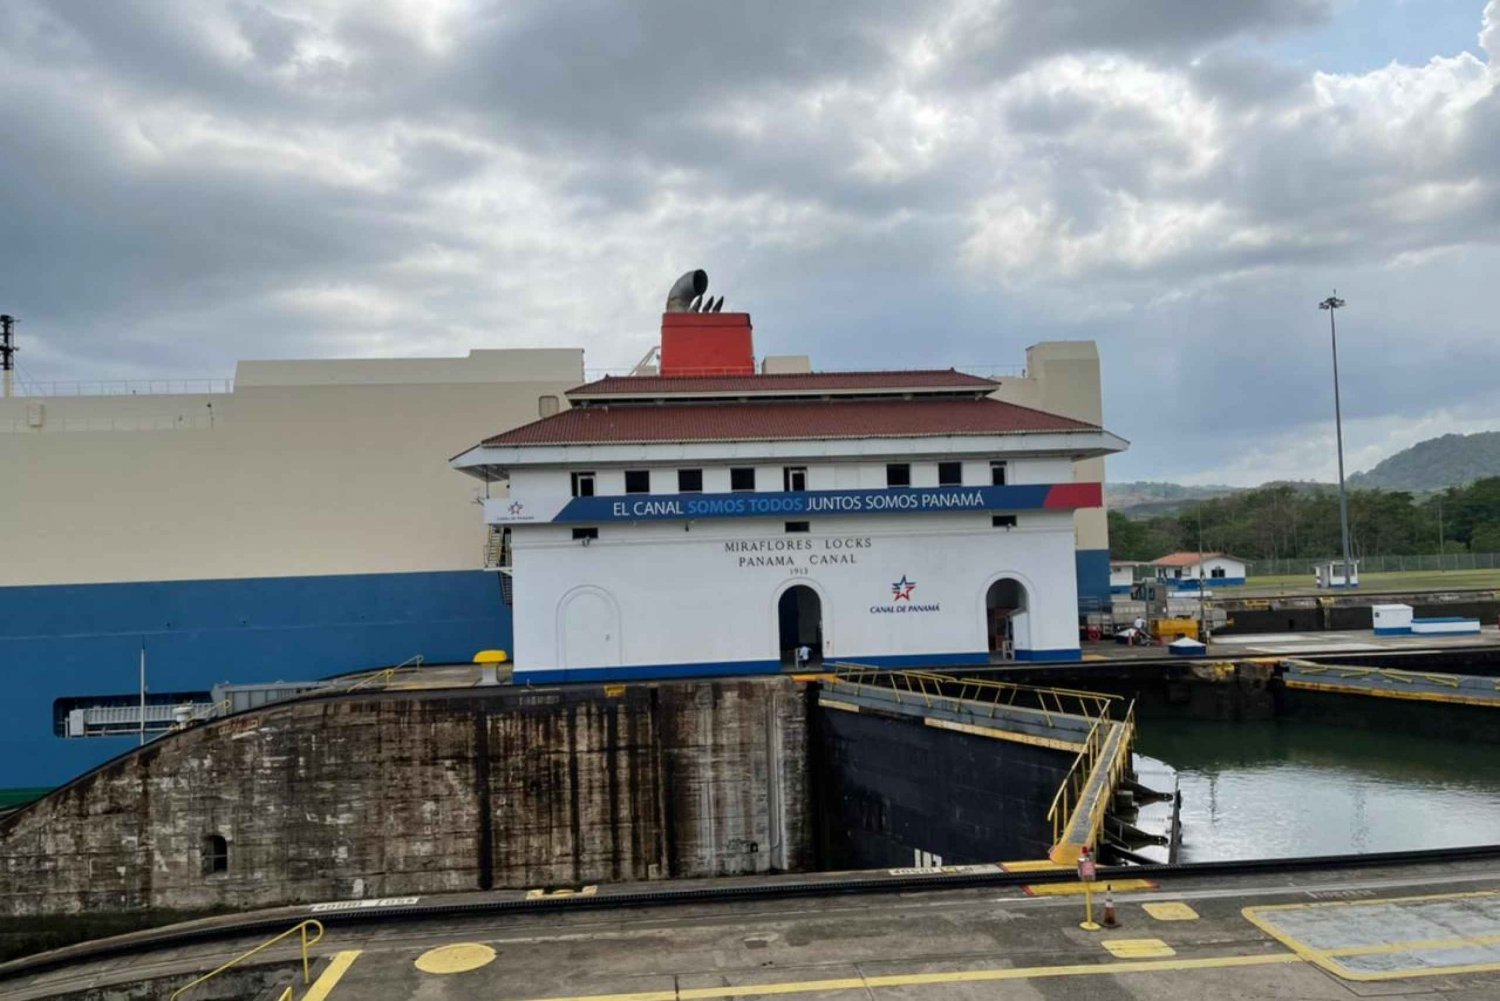 Private or Small Group Tour of the City and Panama Canal